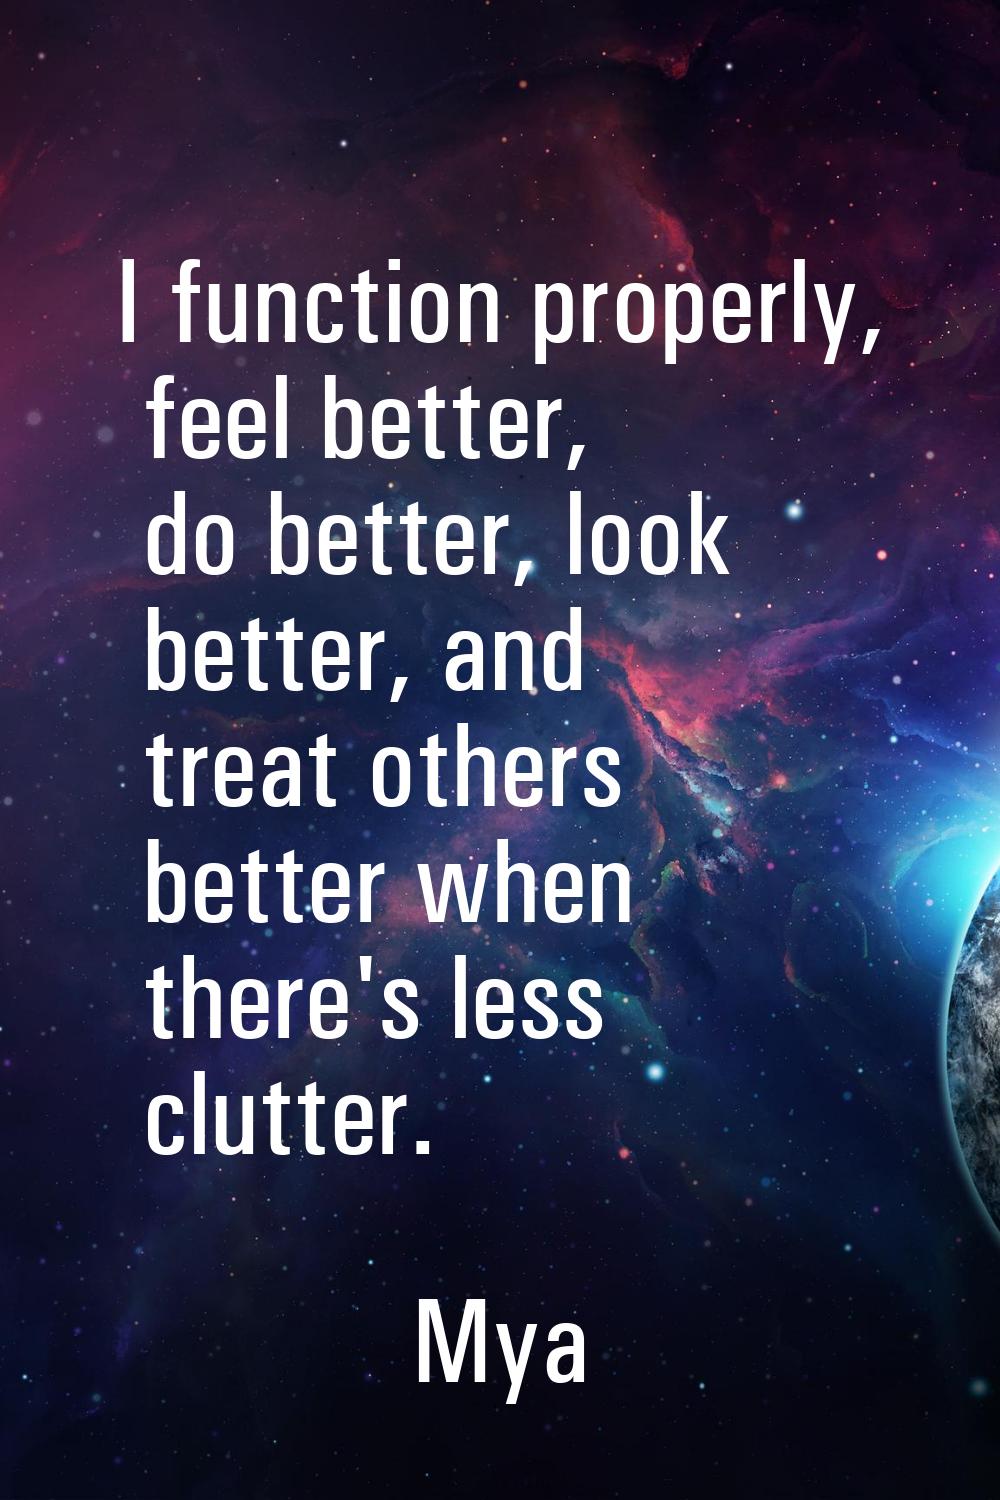 I function properly, feel better, do better, look better, and treat others better when there's less